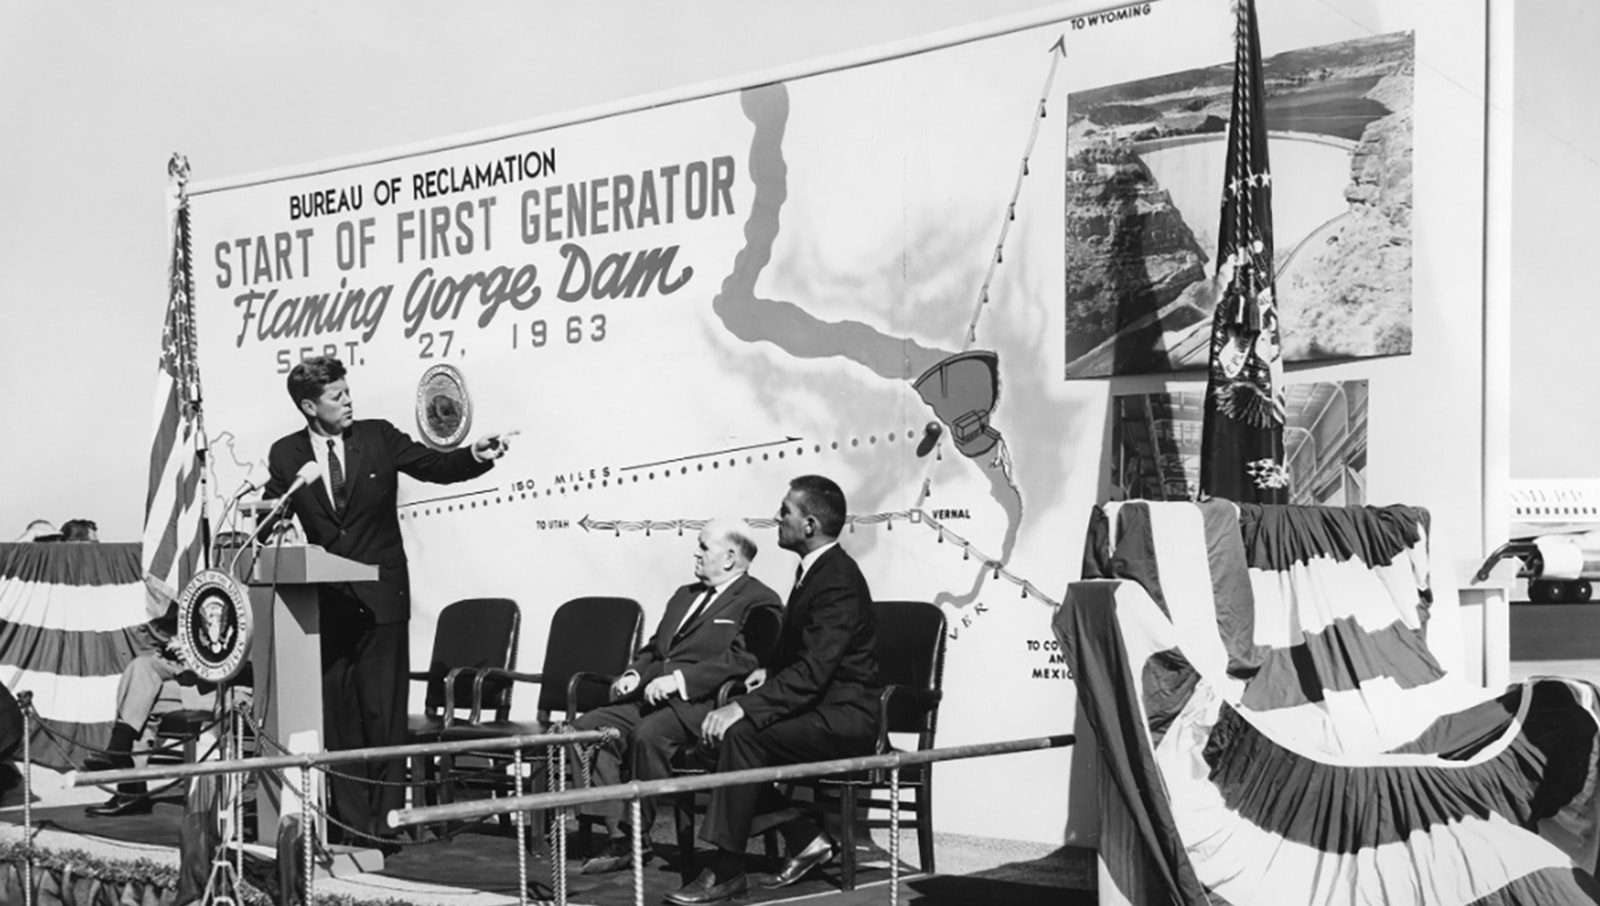 President John F. Kennedy speaks in Salt Lake City prior to activating power production at Flaming Gorge Dam on Sept. 27, 1963.